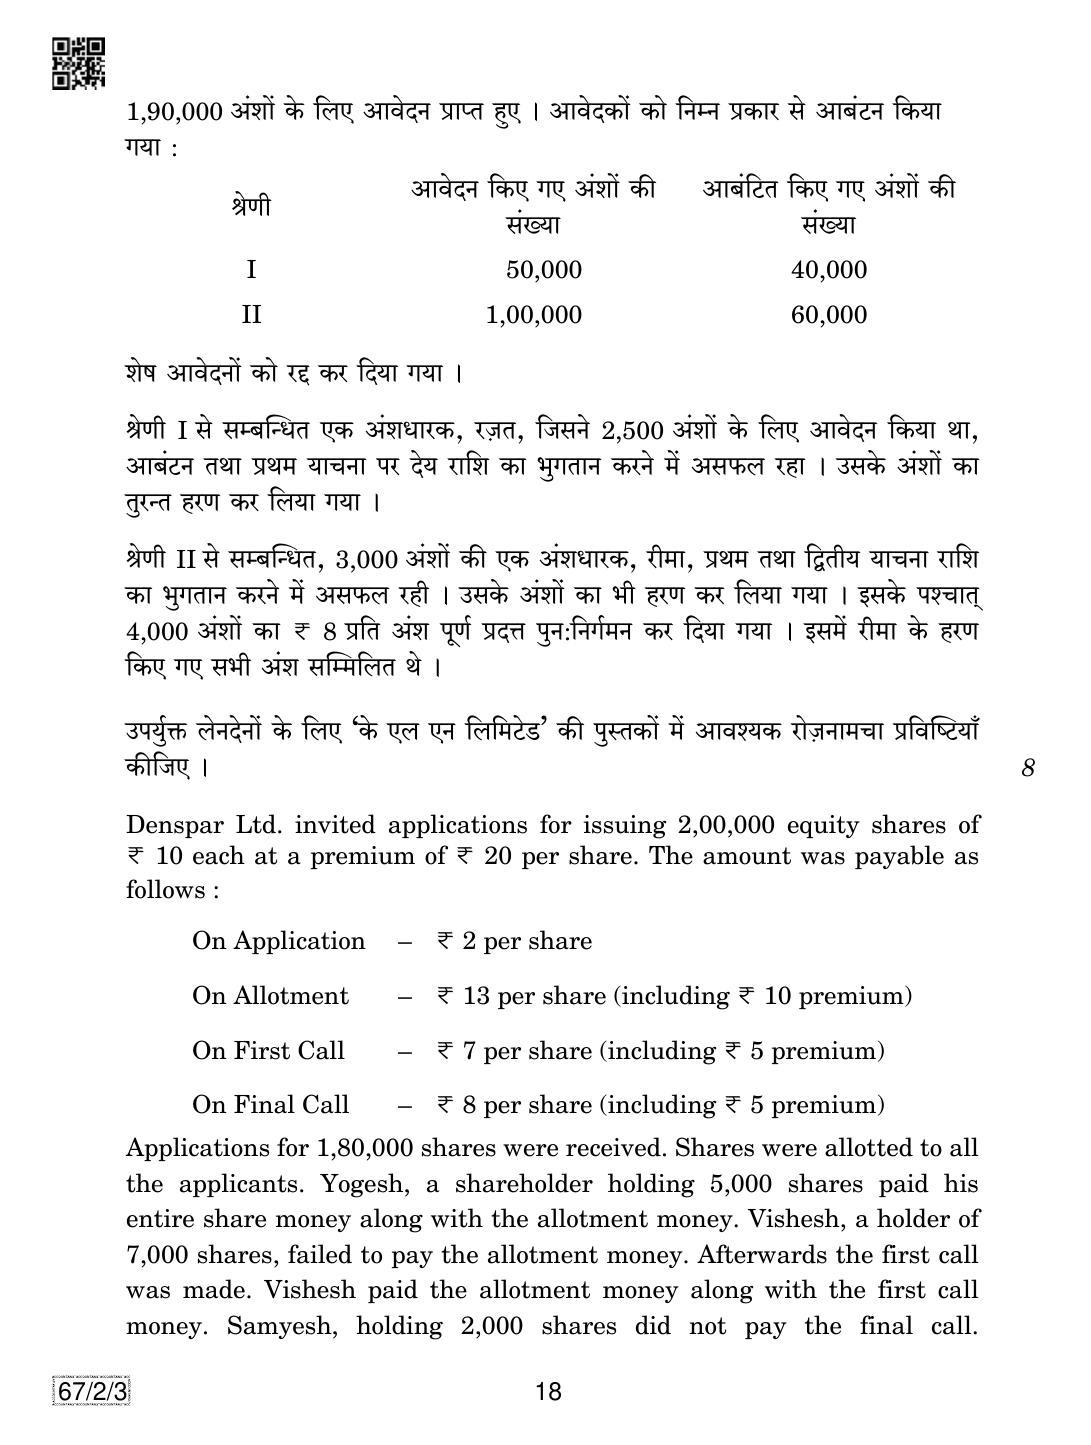 CBSE Class 12 67-2-3 Accountancy 2019 Question Paper - Page 18